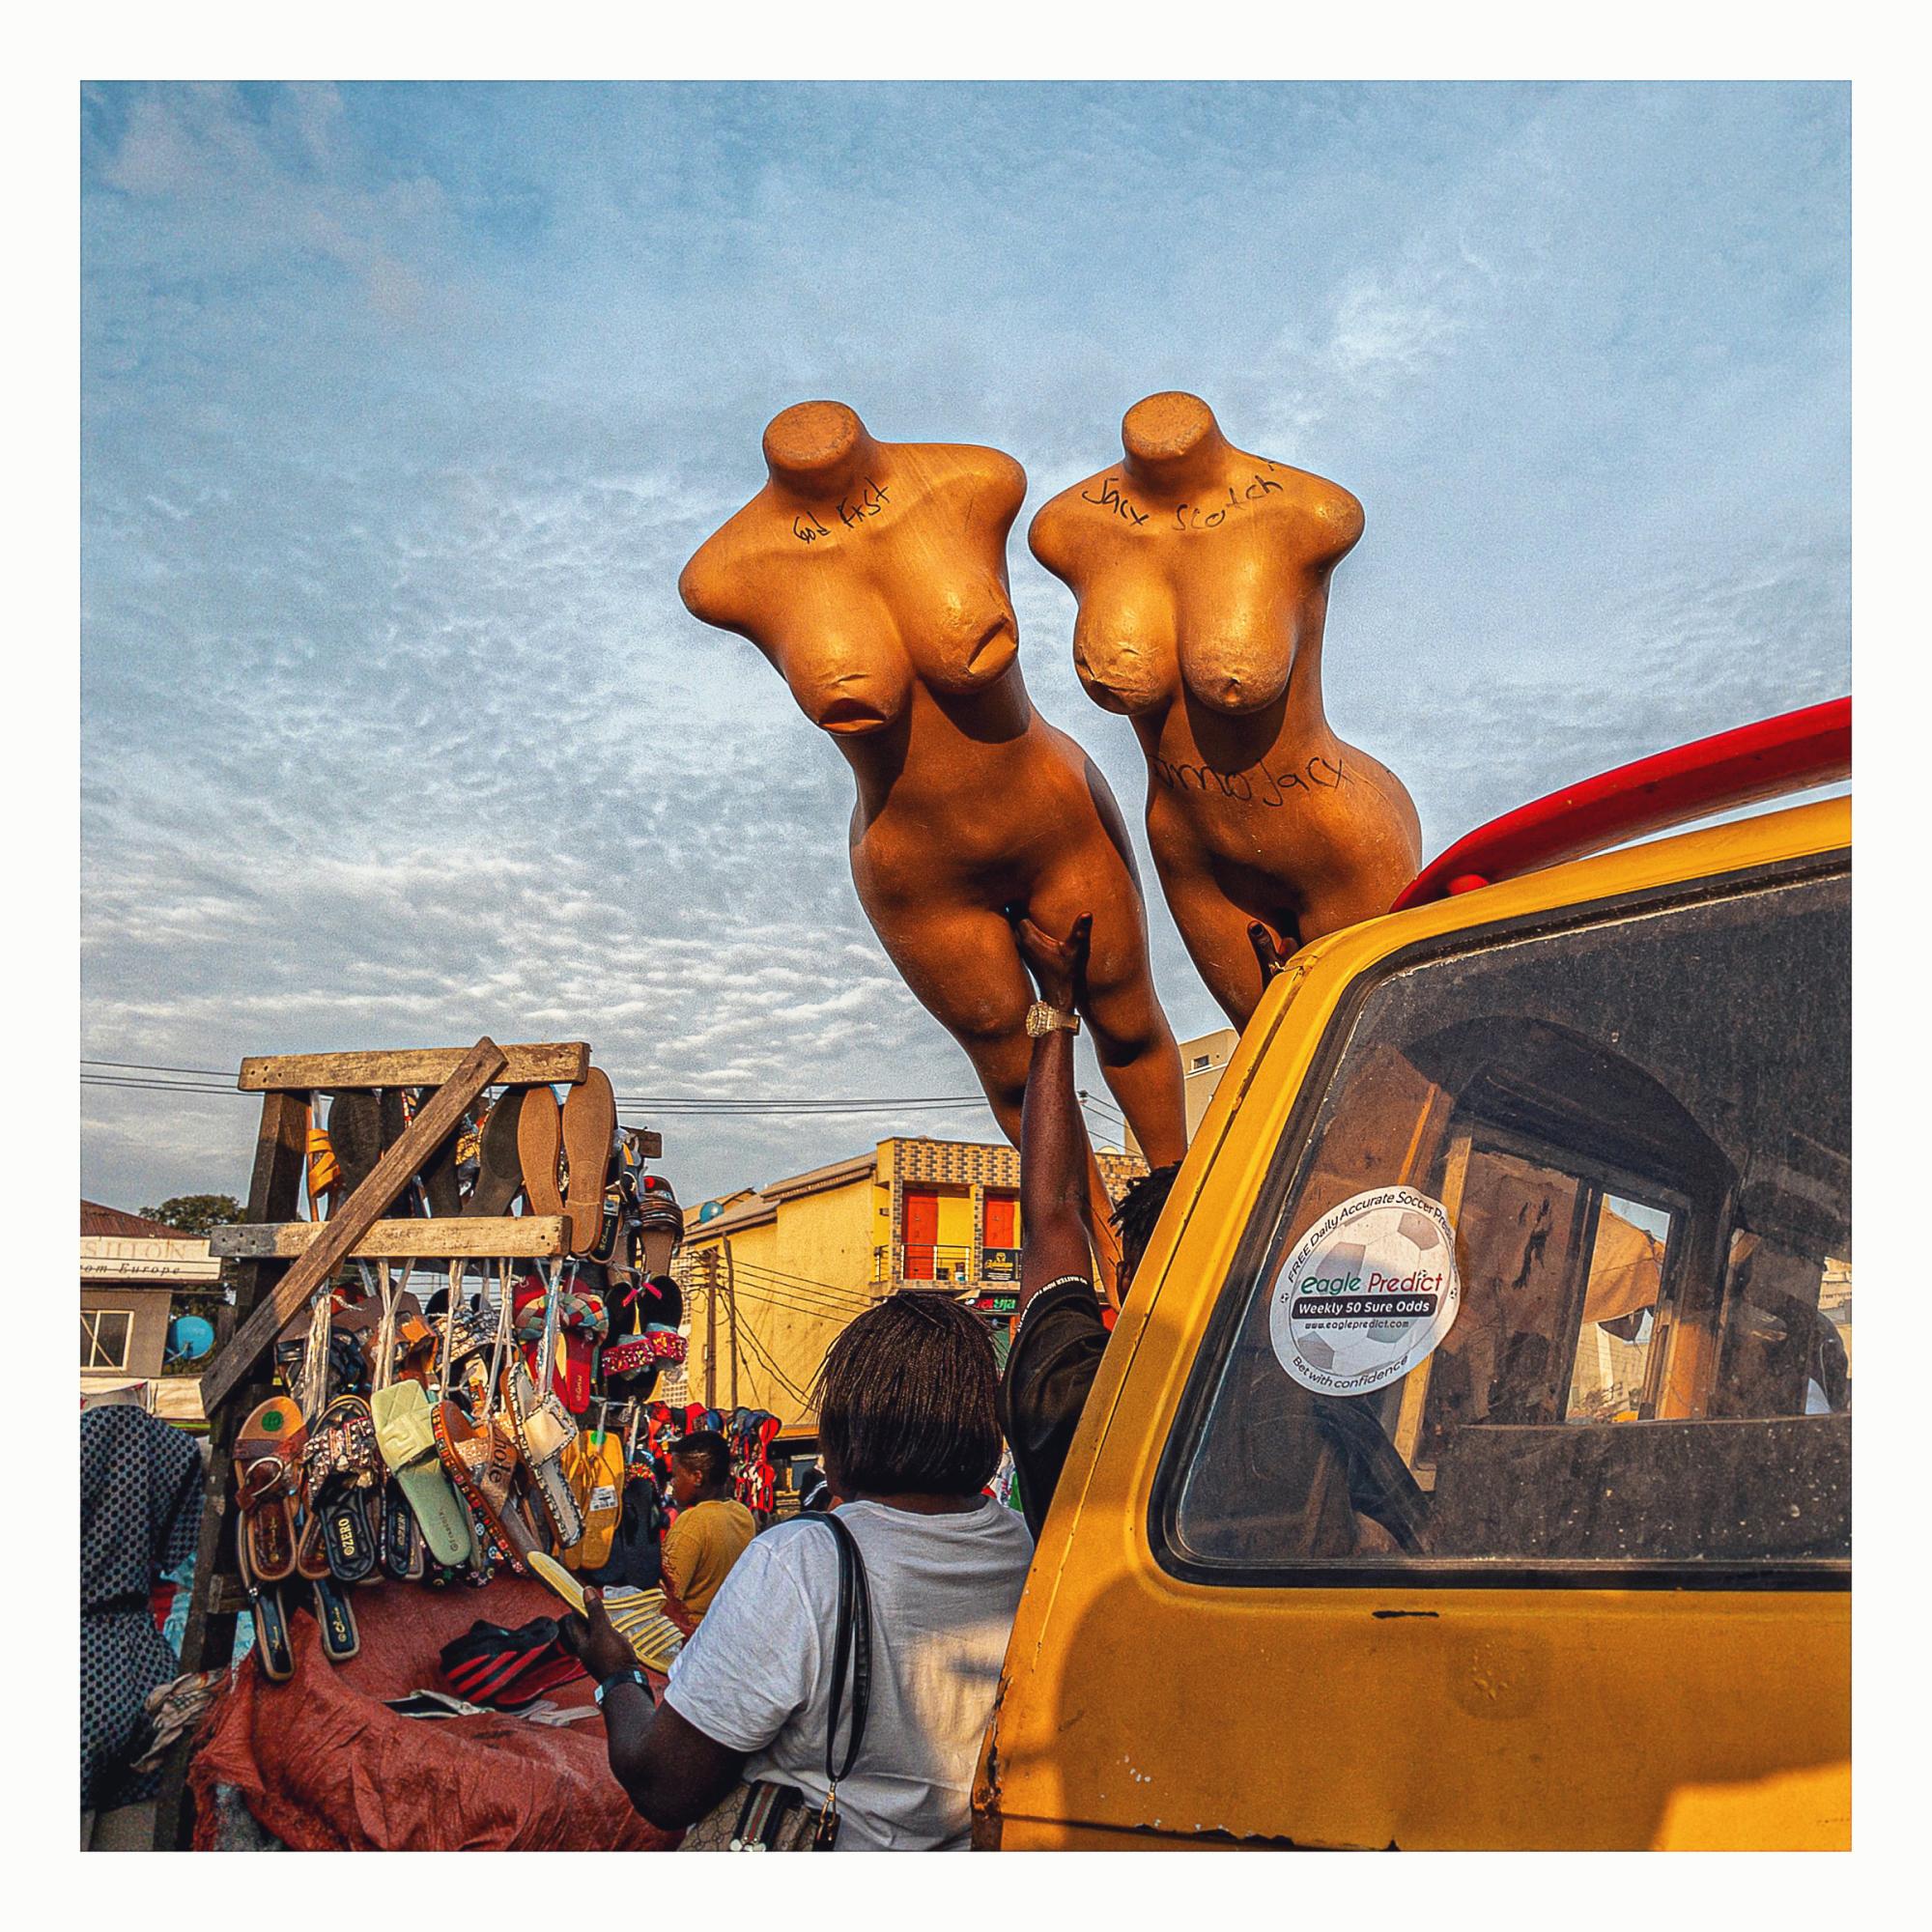 LagosLivesOn: Two mannequins and the soul of Nigeria’s megacity